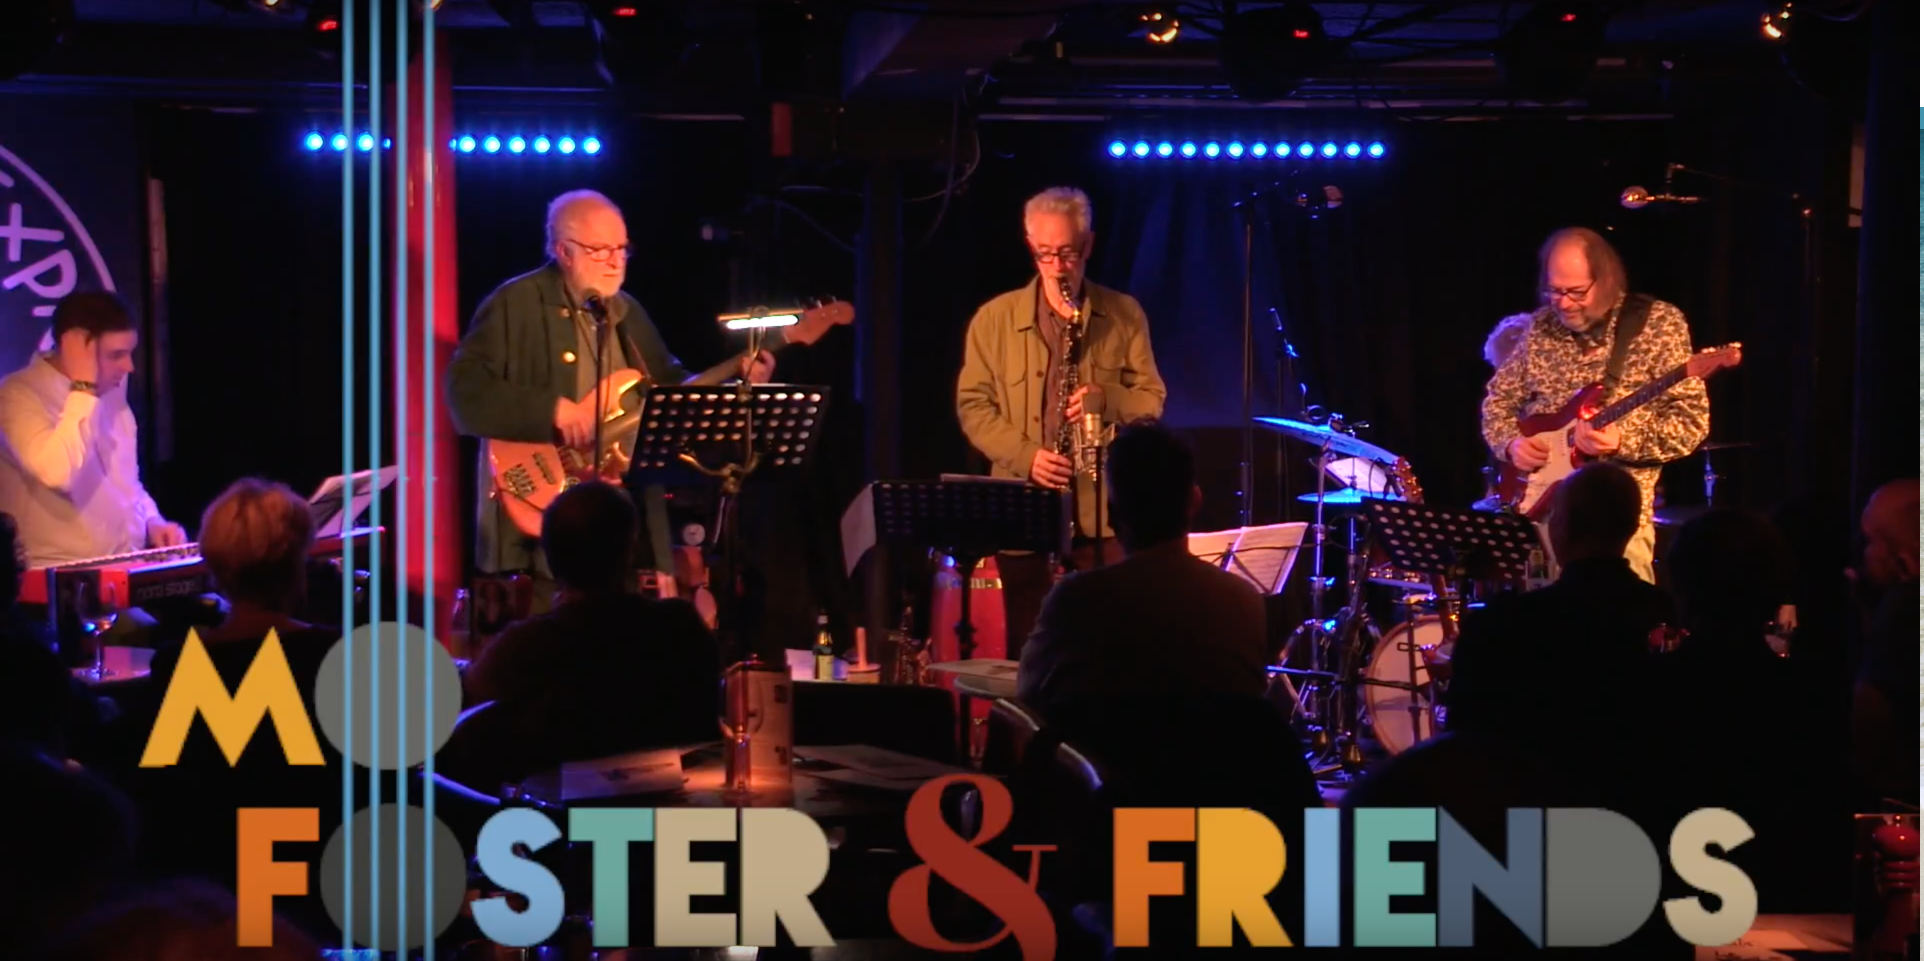 mo foster and friends soho 2016-ft-img